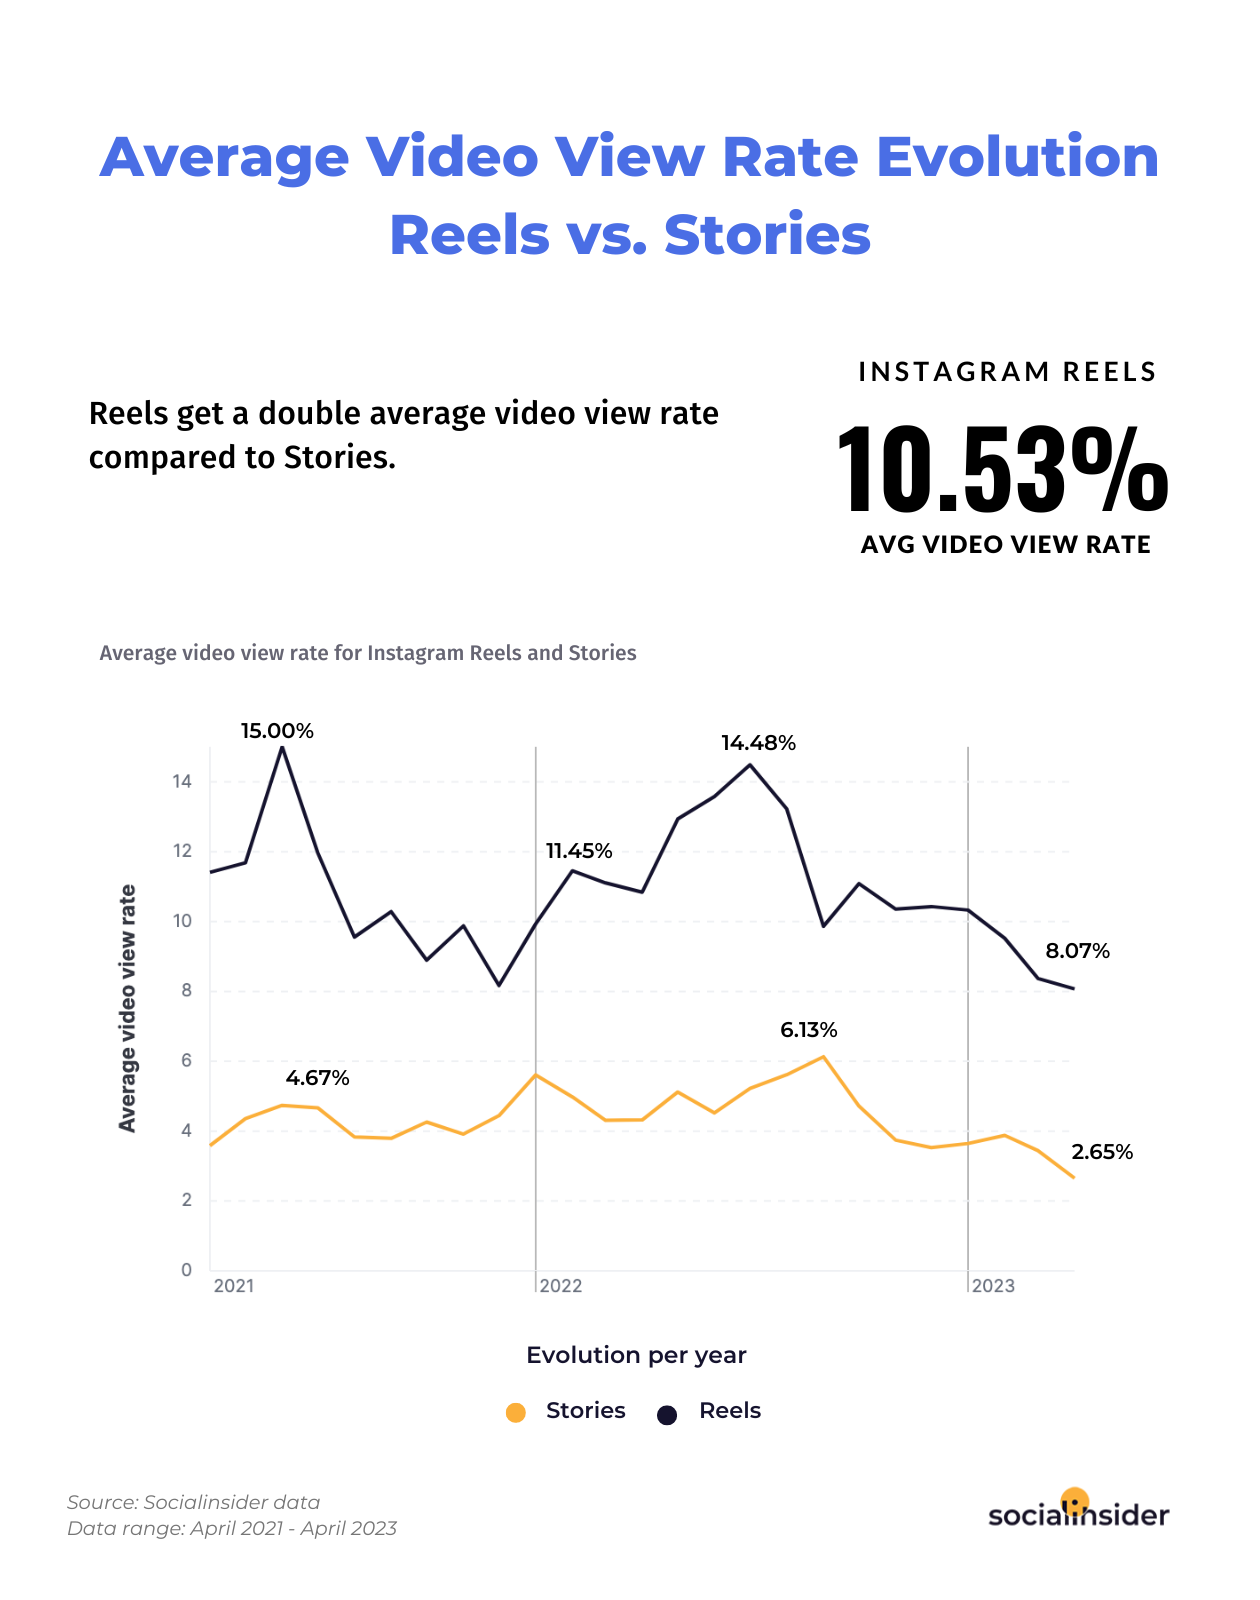 [WDS] Instagram Reels Can Get an Average Video View Rate up to 3X Higher Compared to Stories